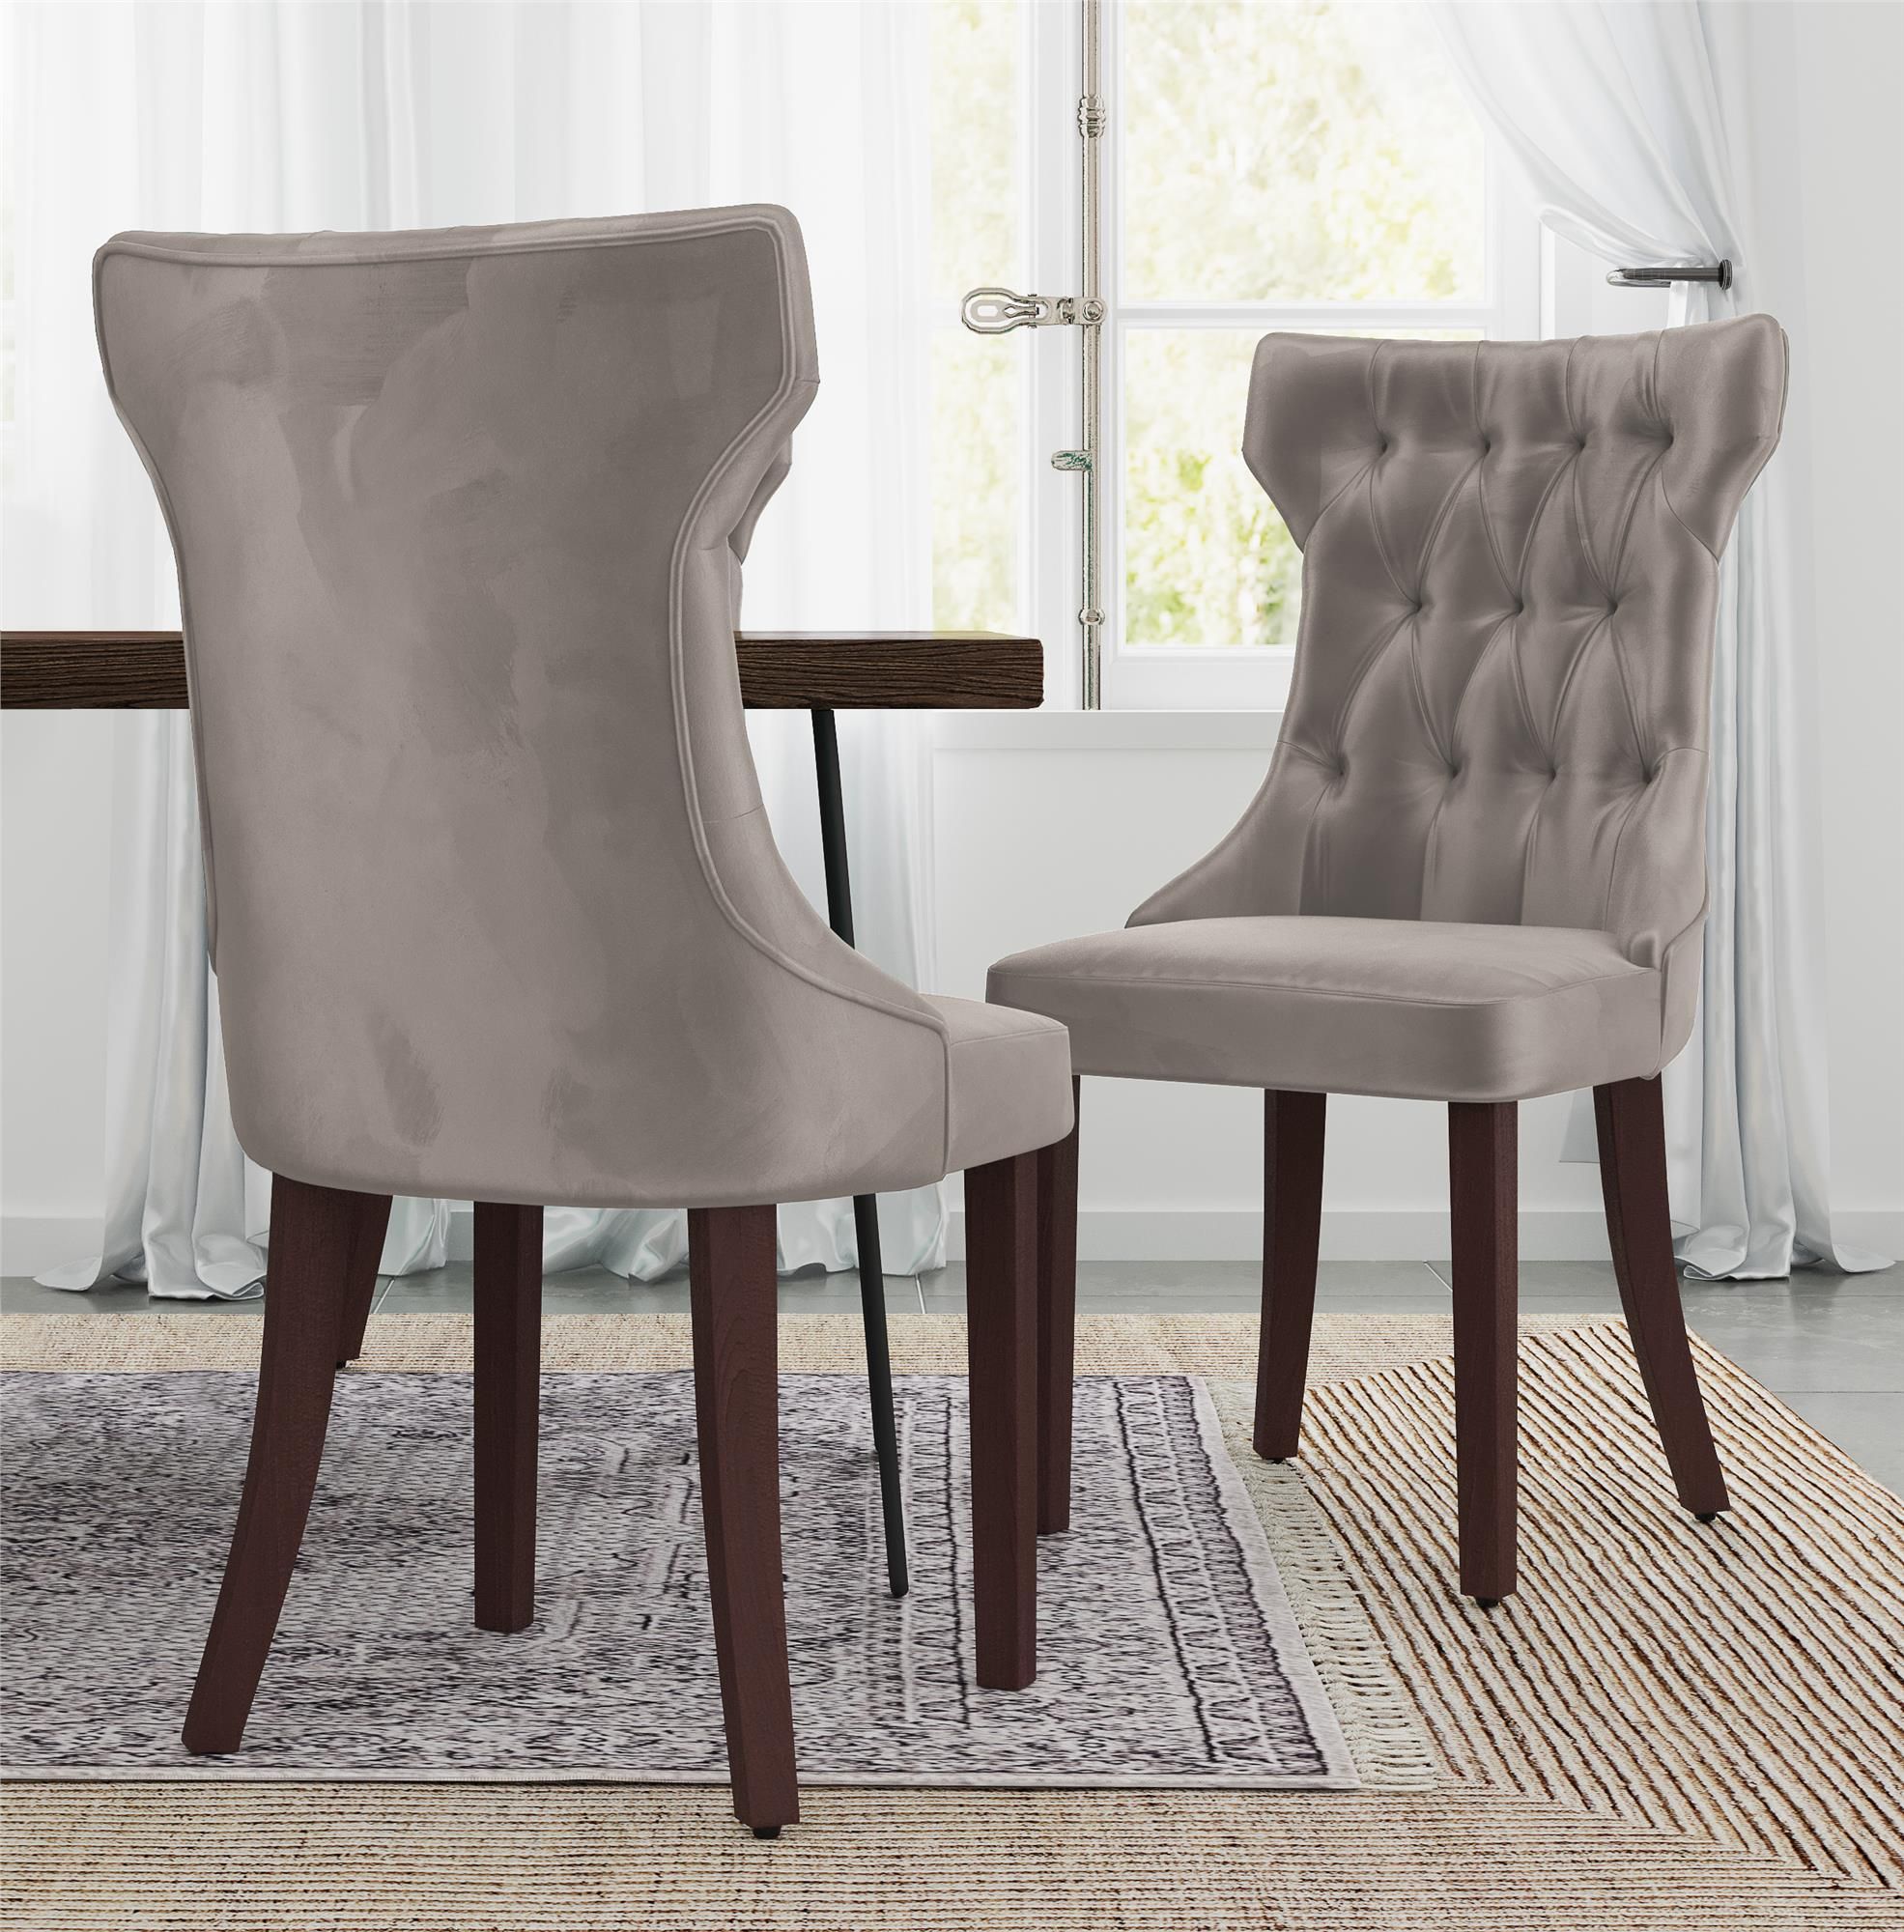 Da6090-coc Clairborne Tufted Dining Chair, Taupe